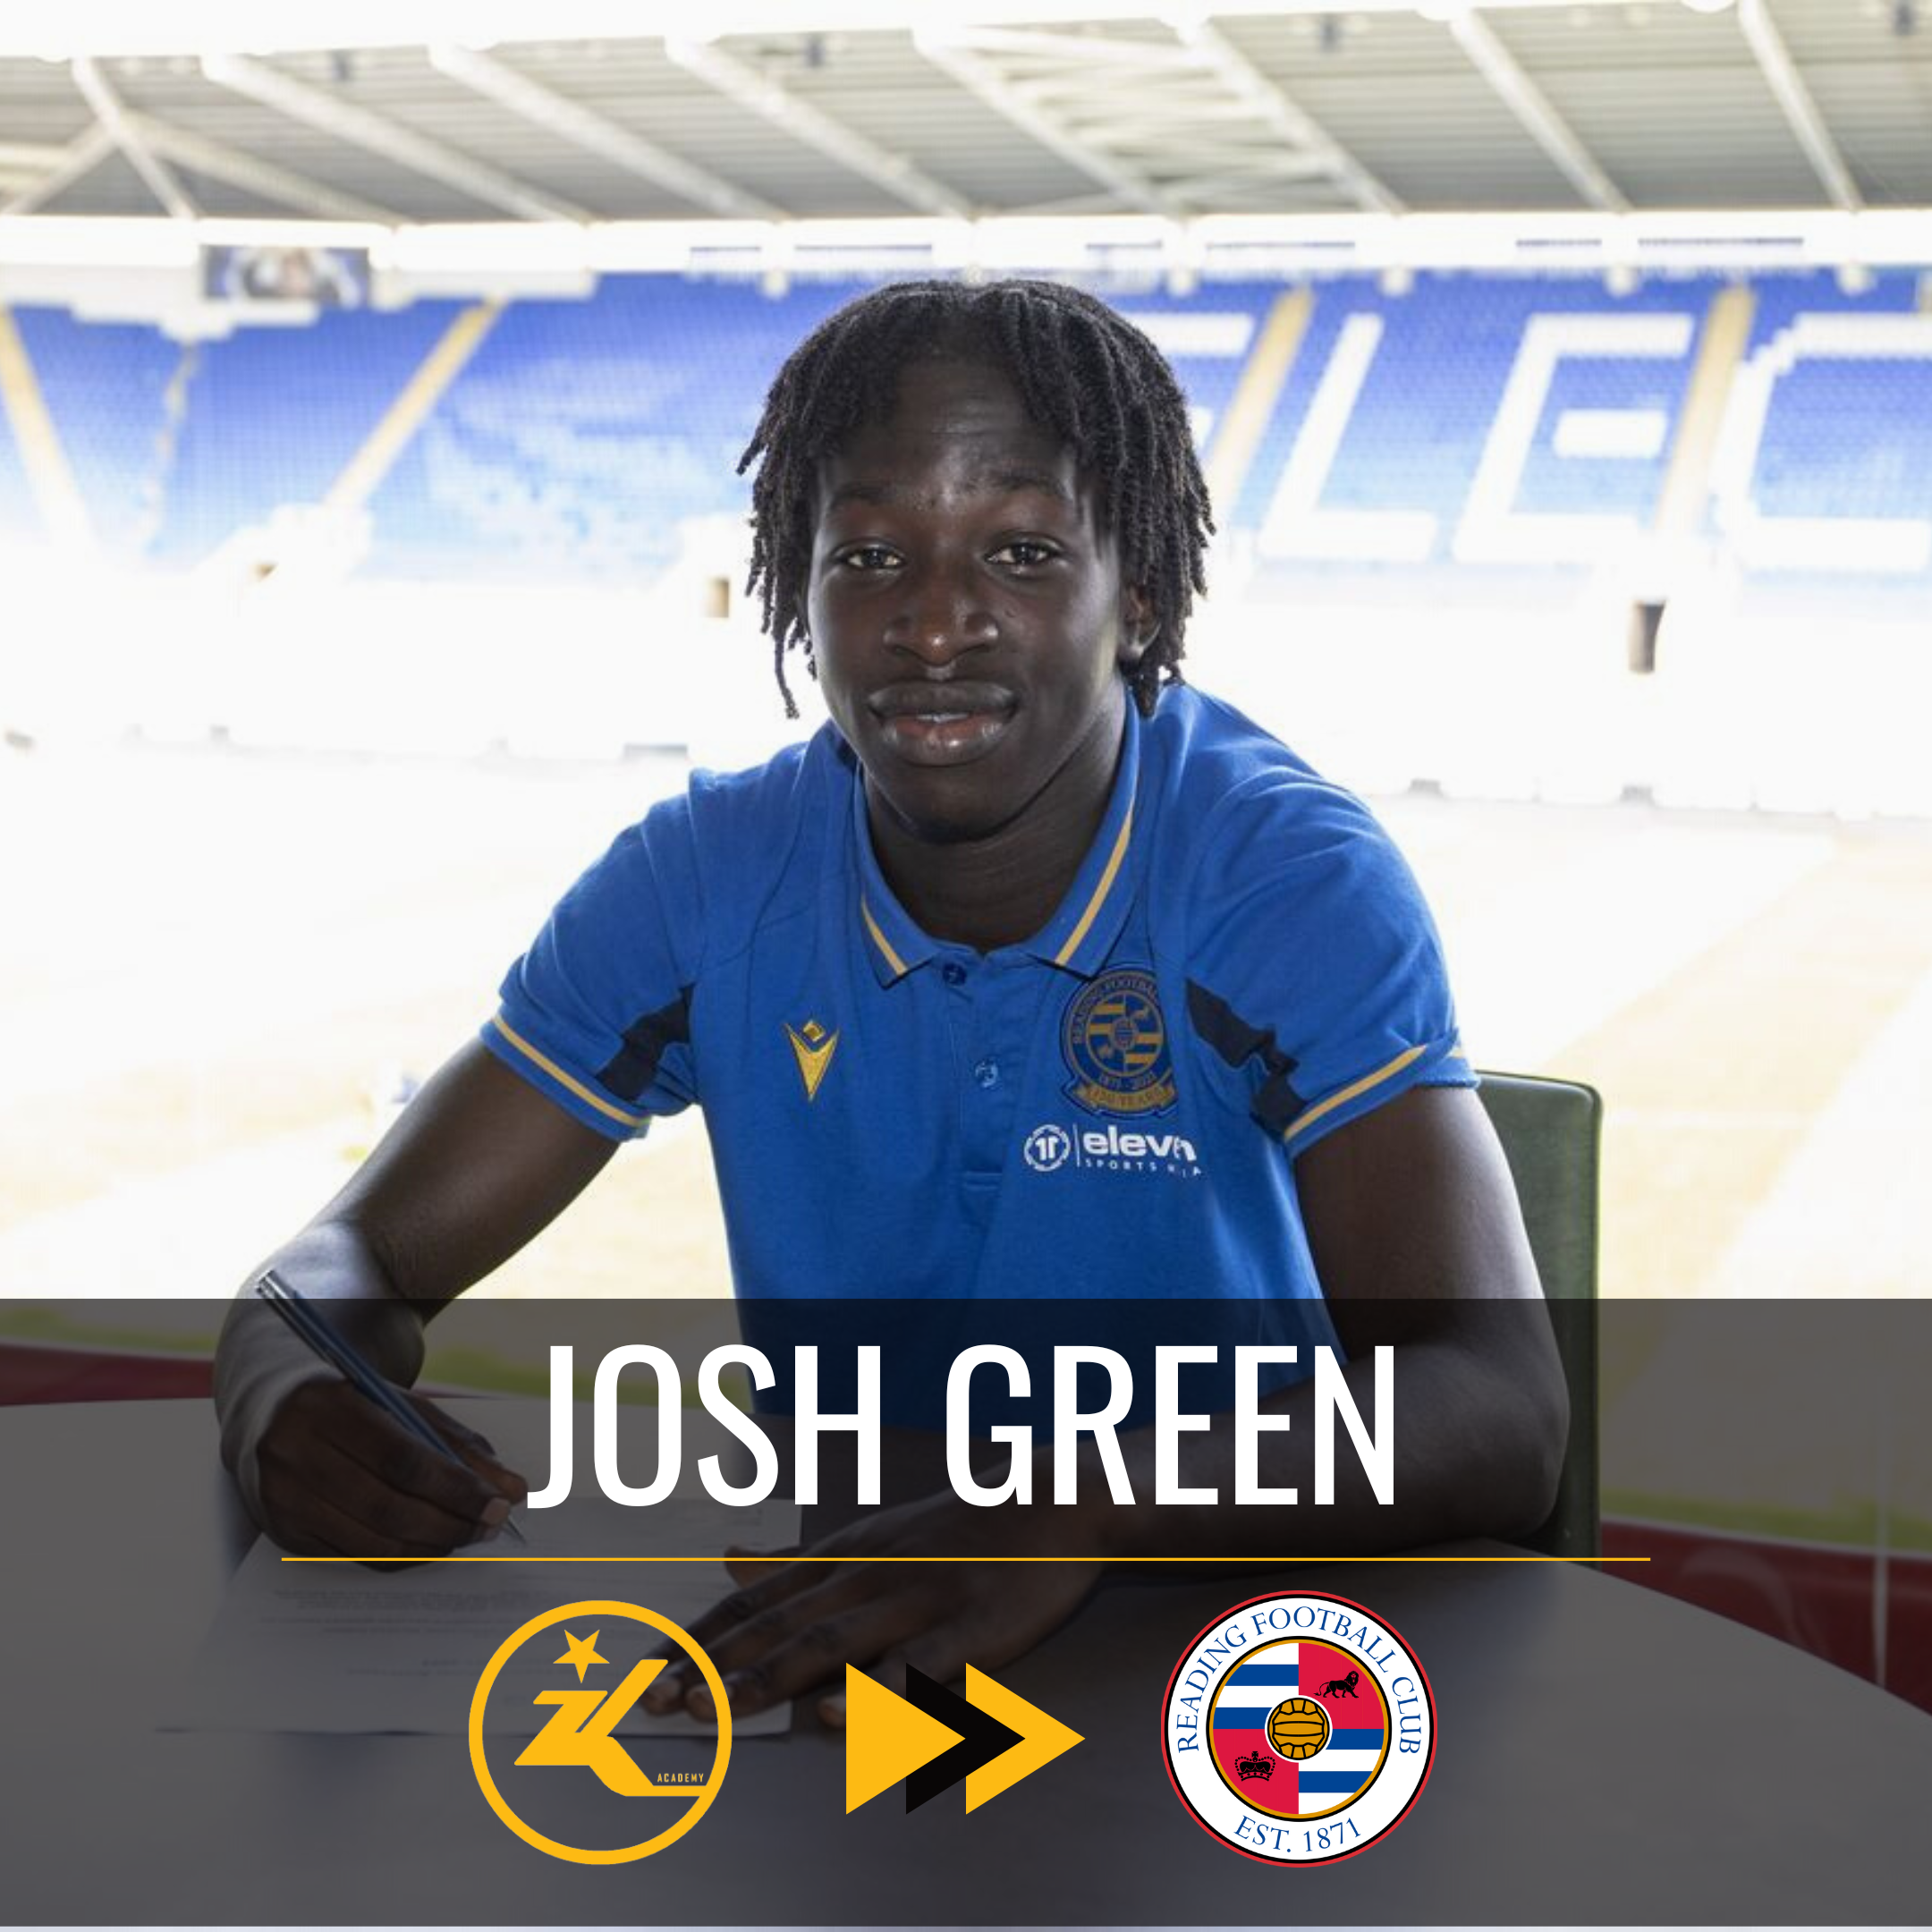 Josh Green signs for Reading FC